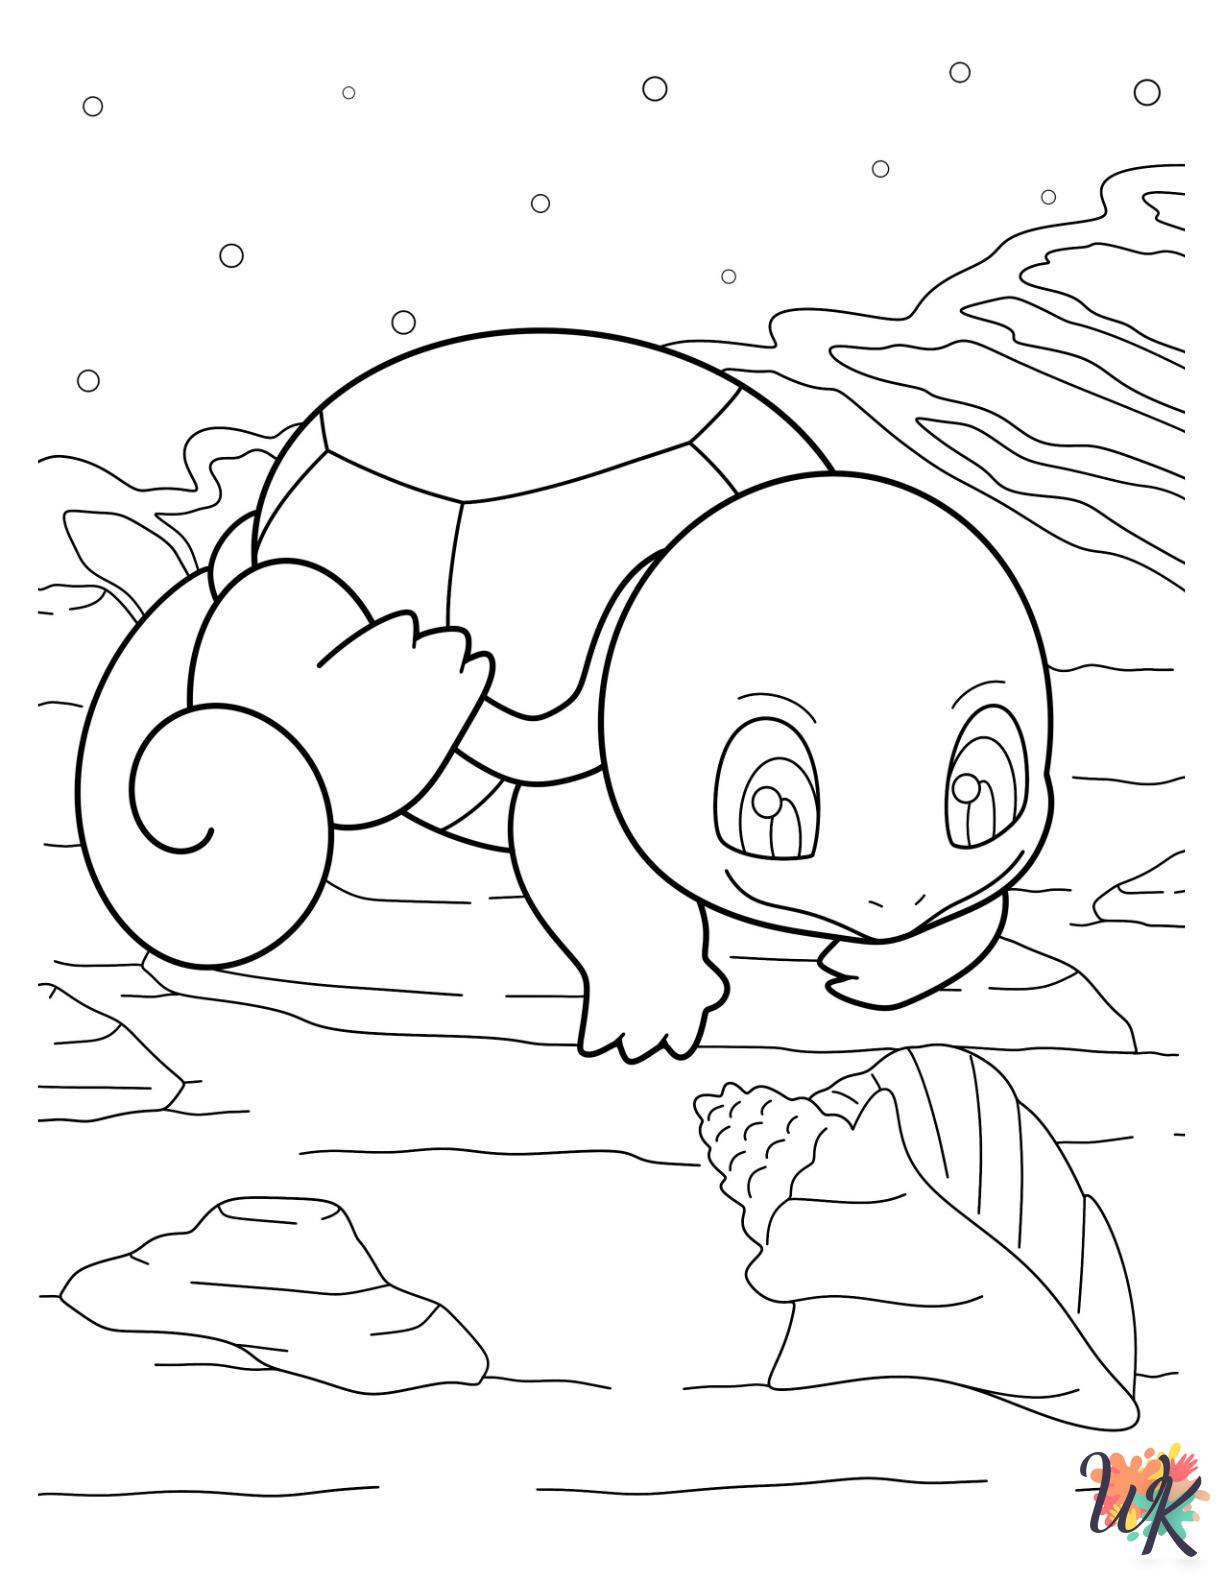 old-fashioned Squirtle coloring pages